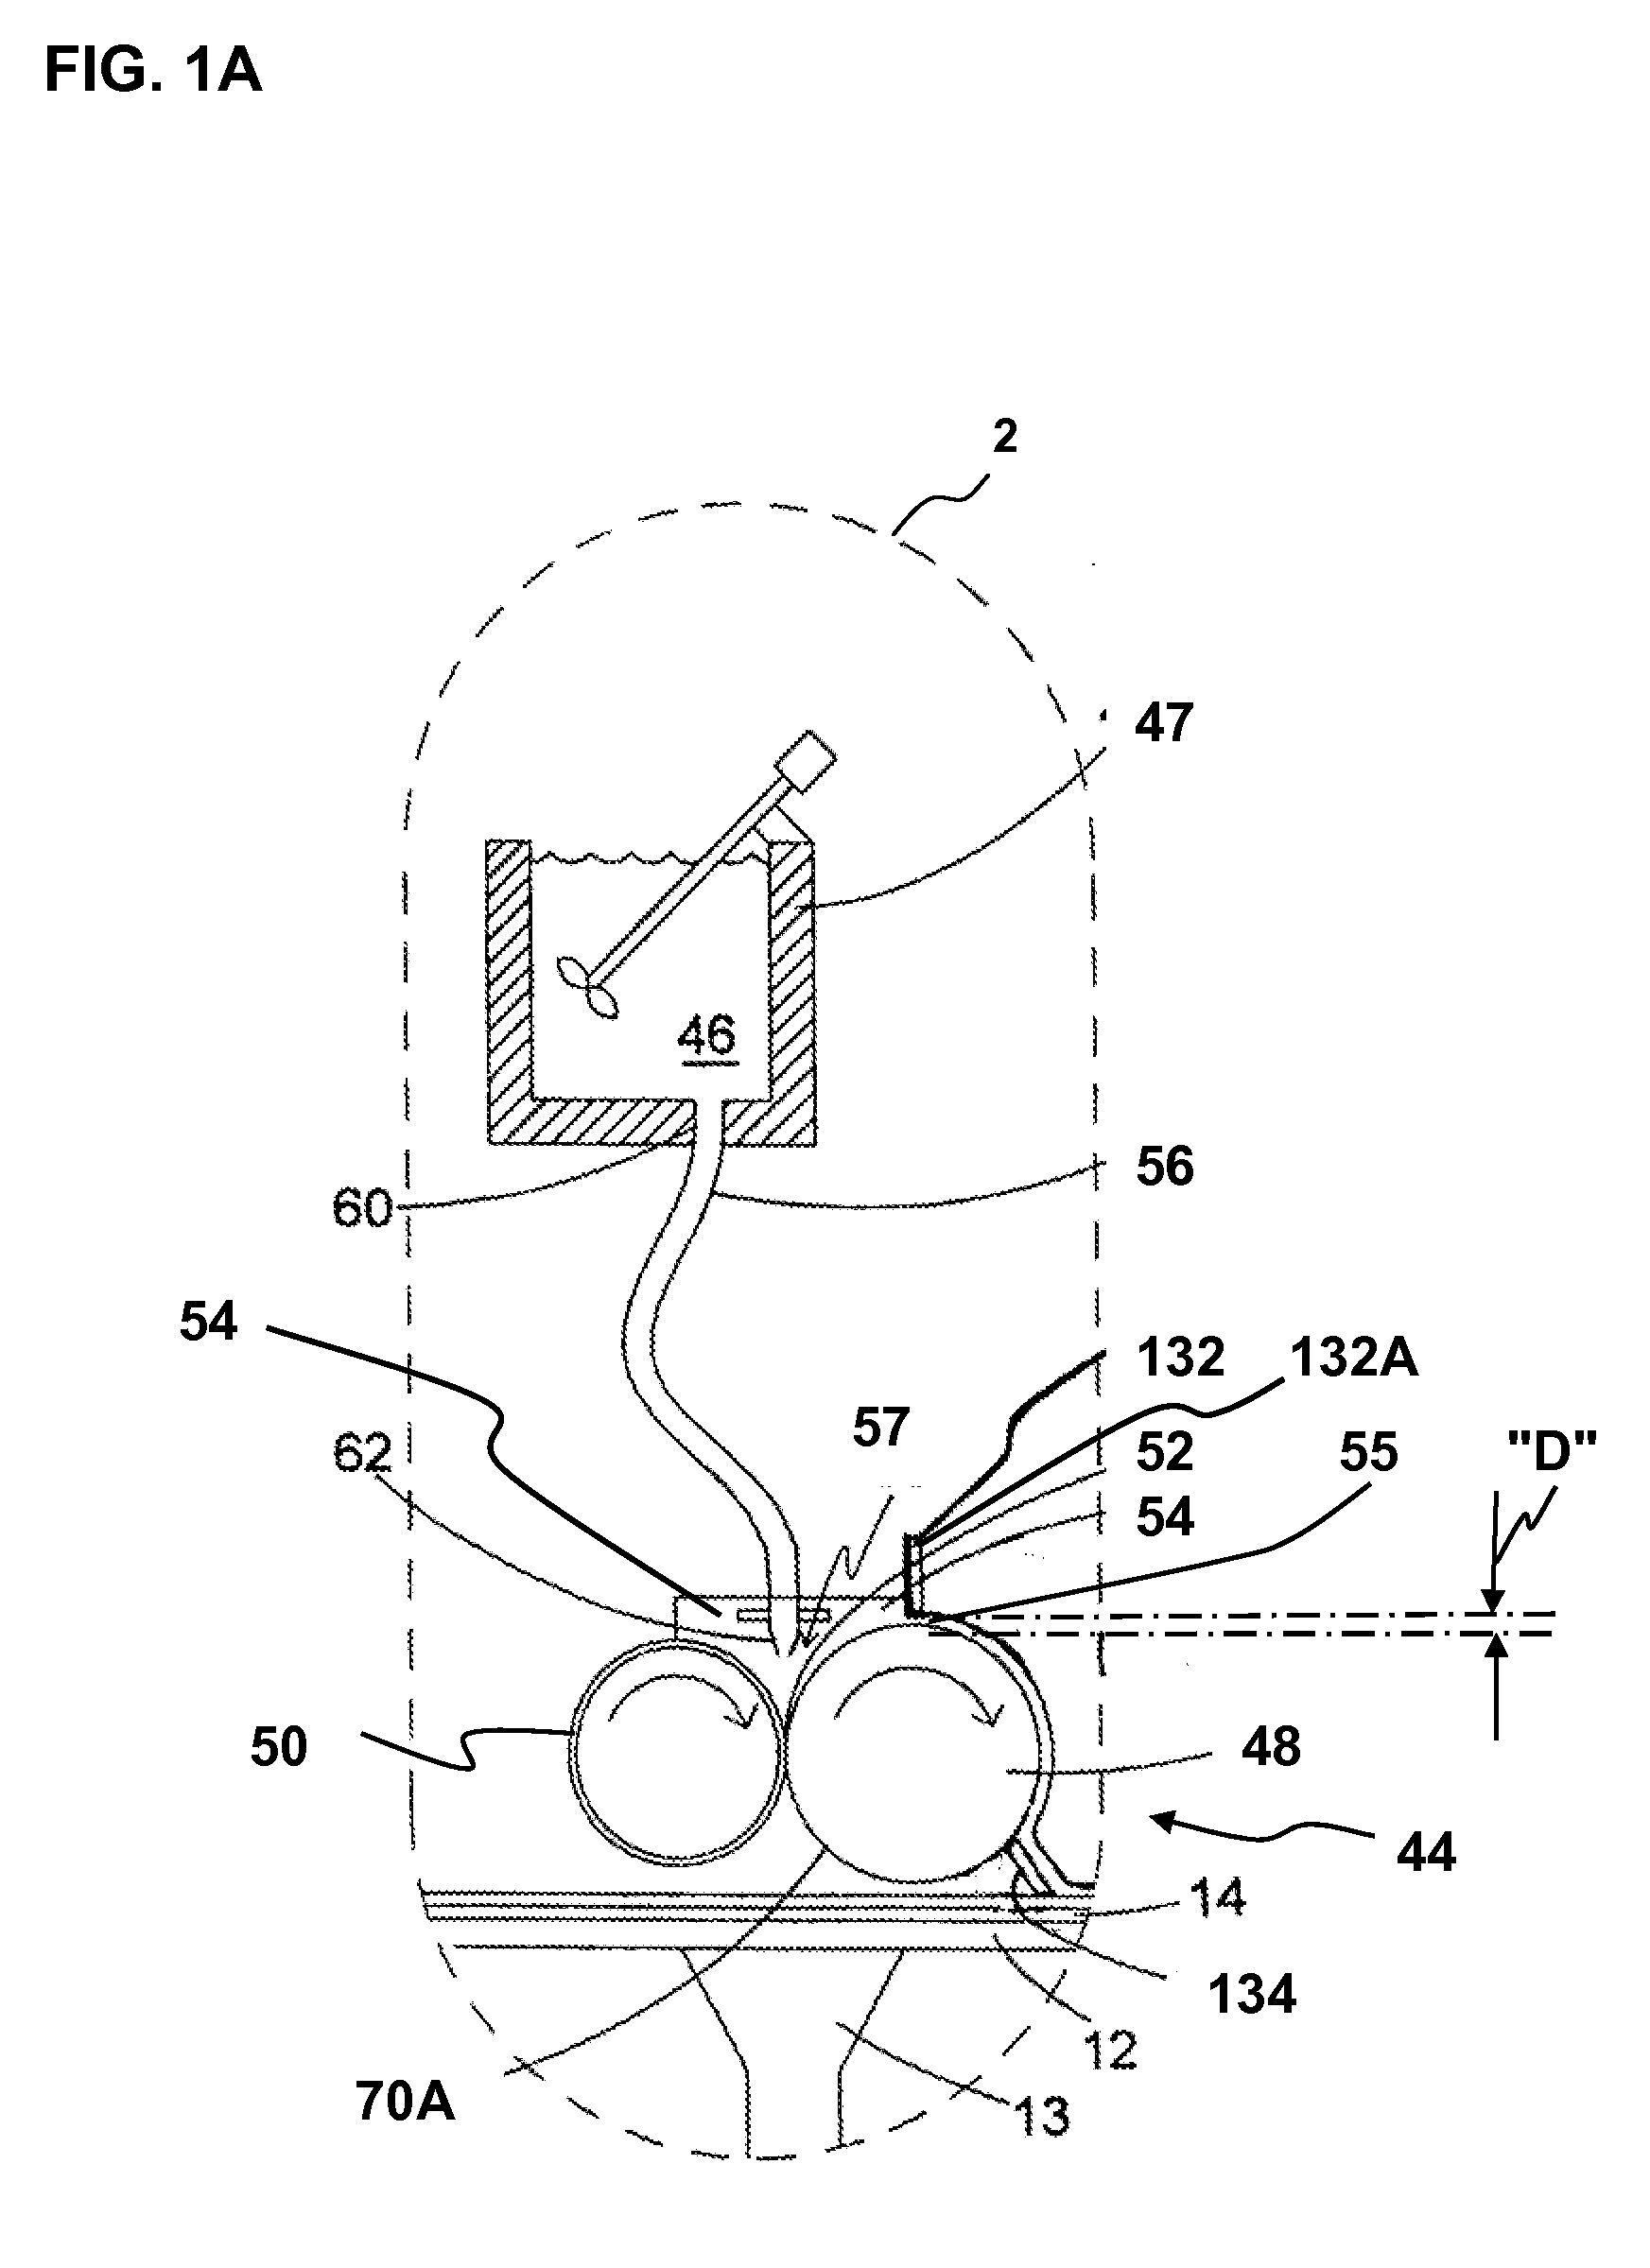 Panel smoothing process and apparatus for forming a smooth continuous surface on fiber-reinforced structural cement panels